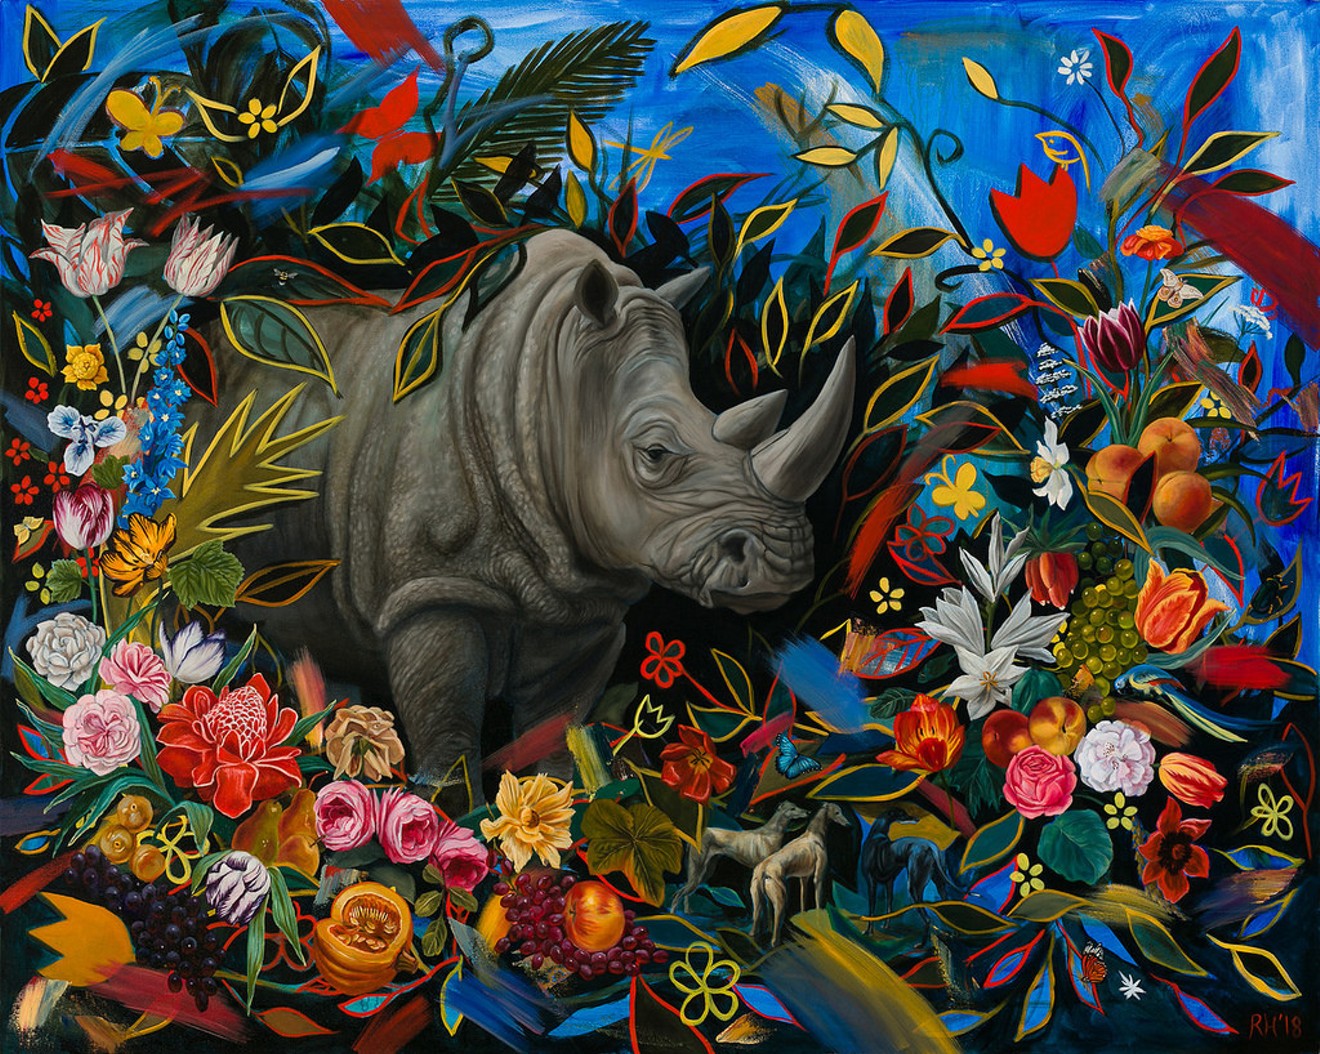 Robin Hextrum's "Rhino," for Art of the State 2019.